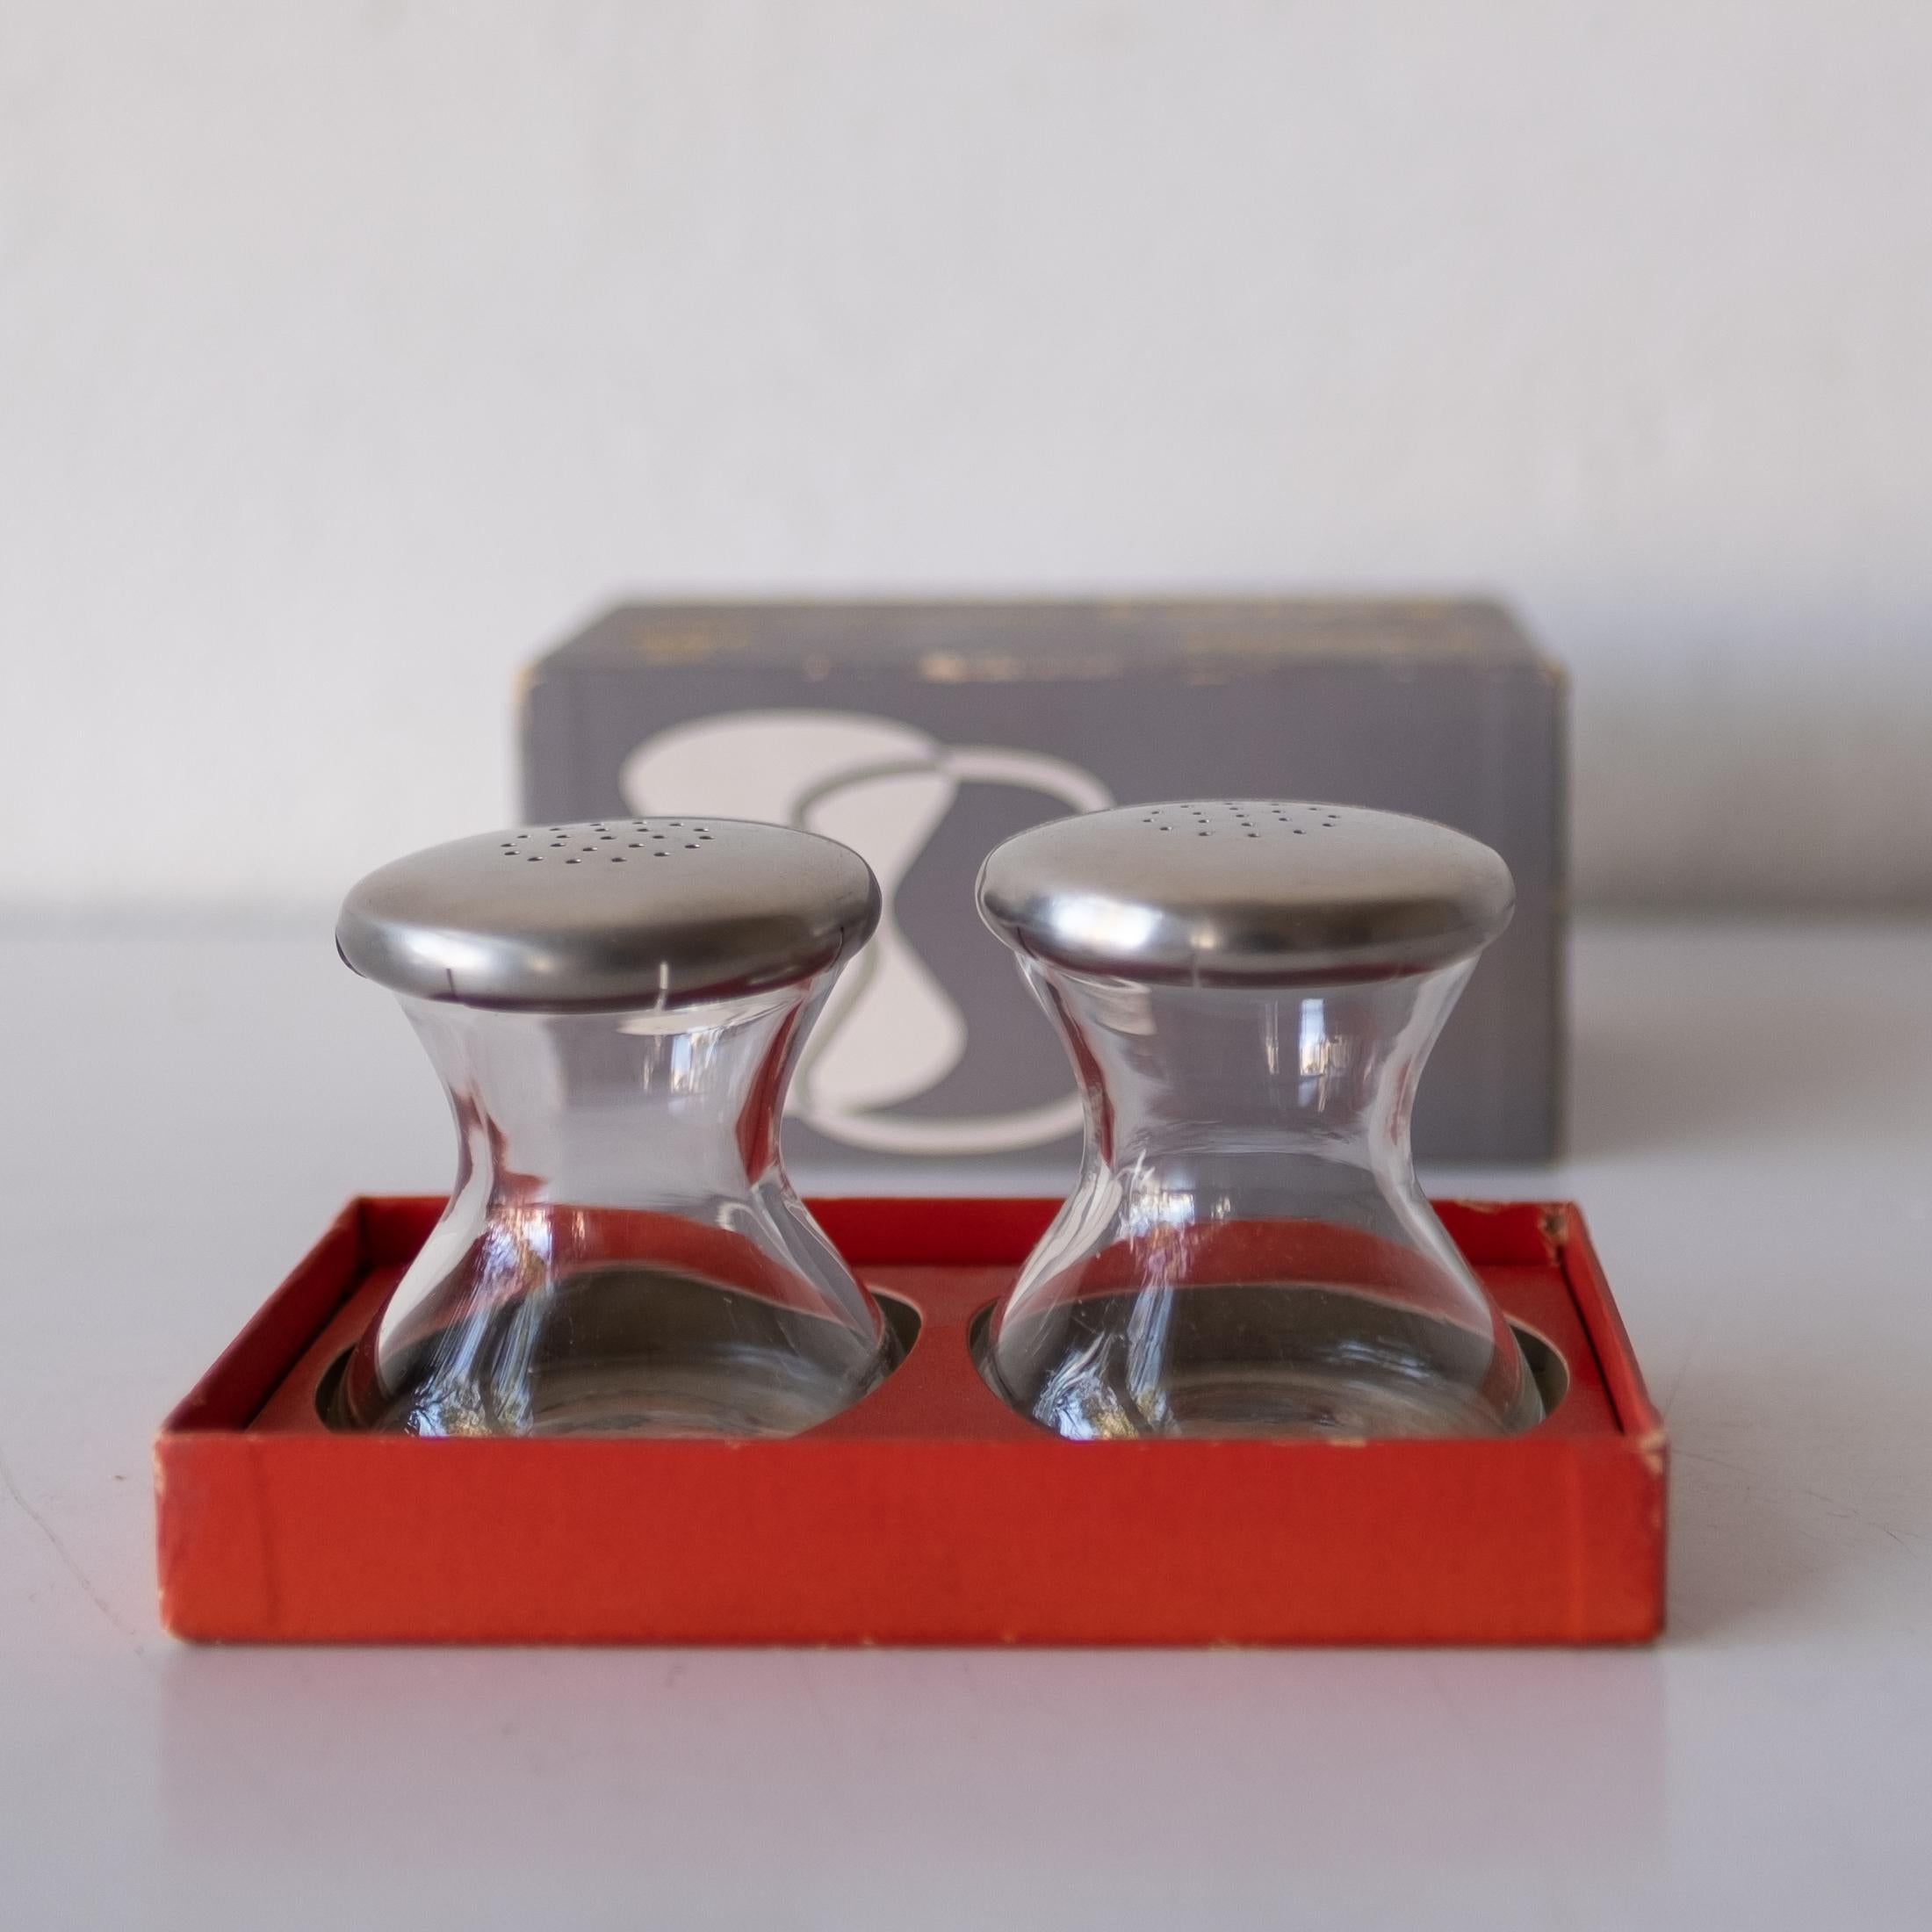 German Wilhelm Wagenfeld Bauhaus Salt and Pepper Shakers New in Box 1950s For Sale